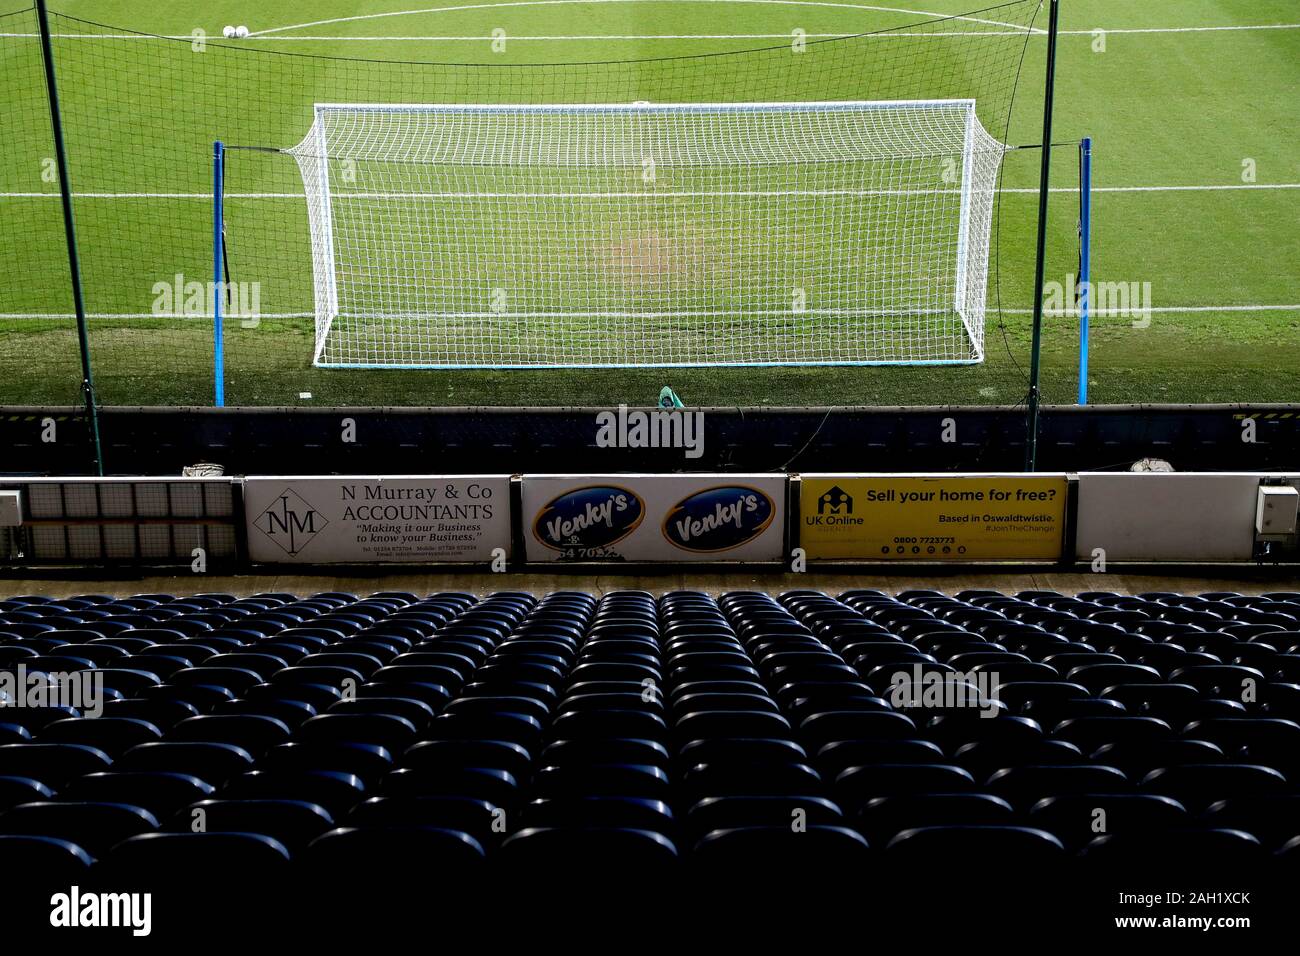 Venky's branding behind the goal ahead of the Sky Bet Championship match at Ewood Park, Blackburn. Stock Photo